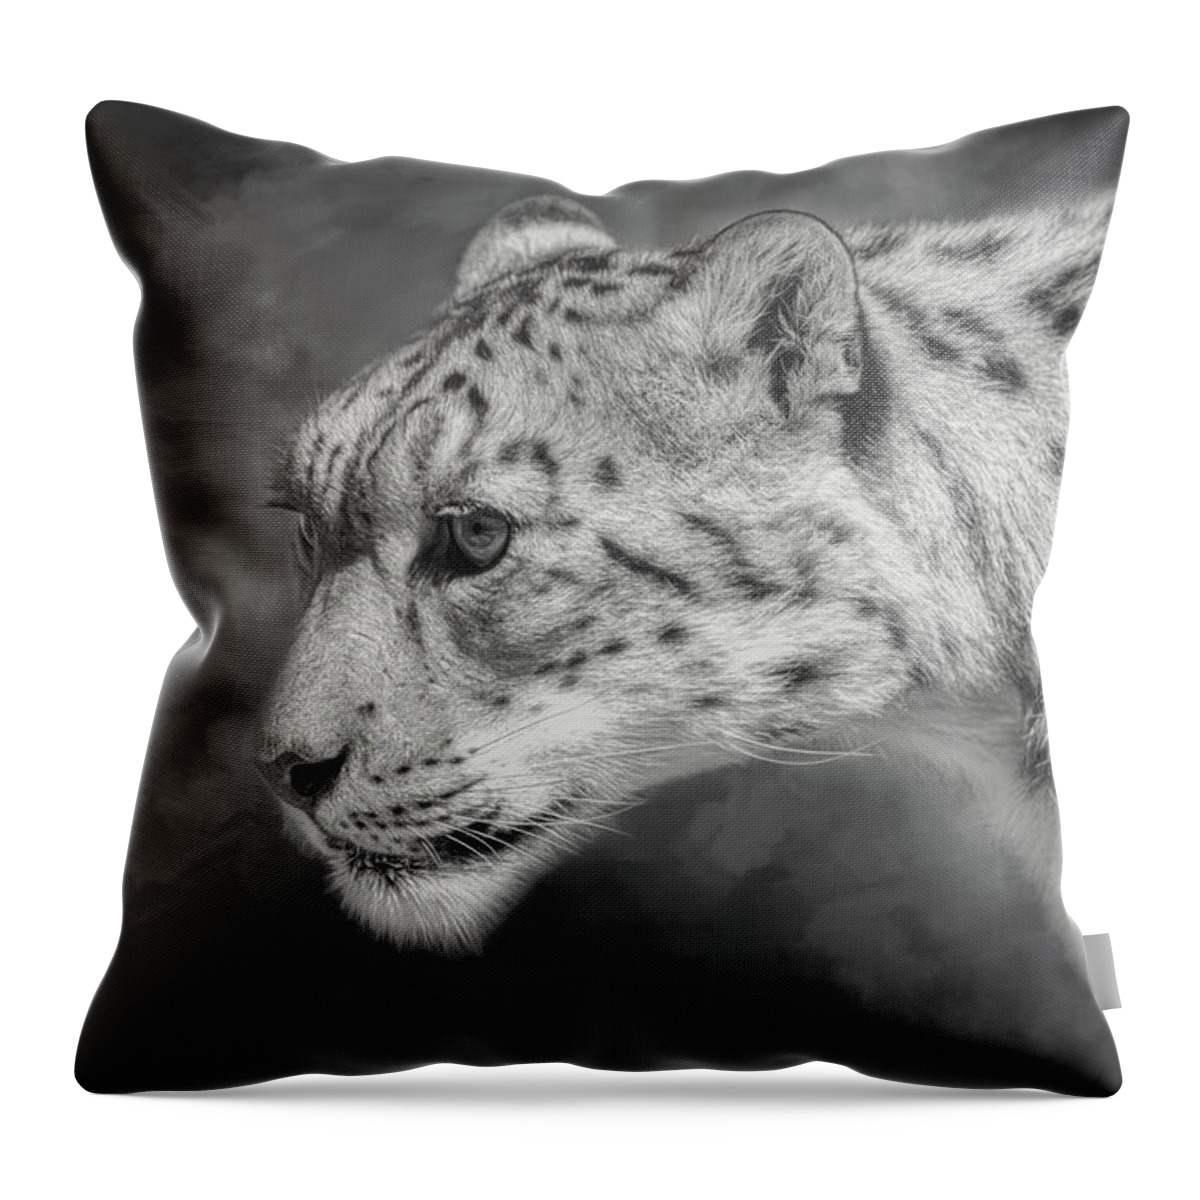 Snow Leopard Throw Pillow featuring the digital art Snow Leopard by Nicole Wilde